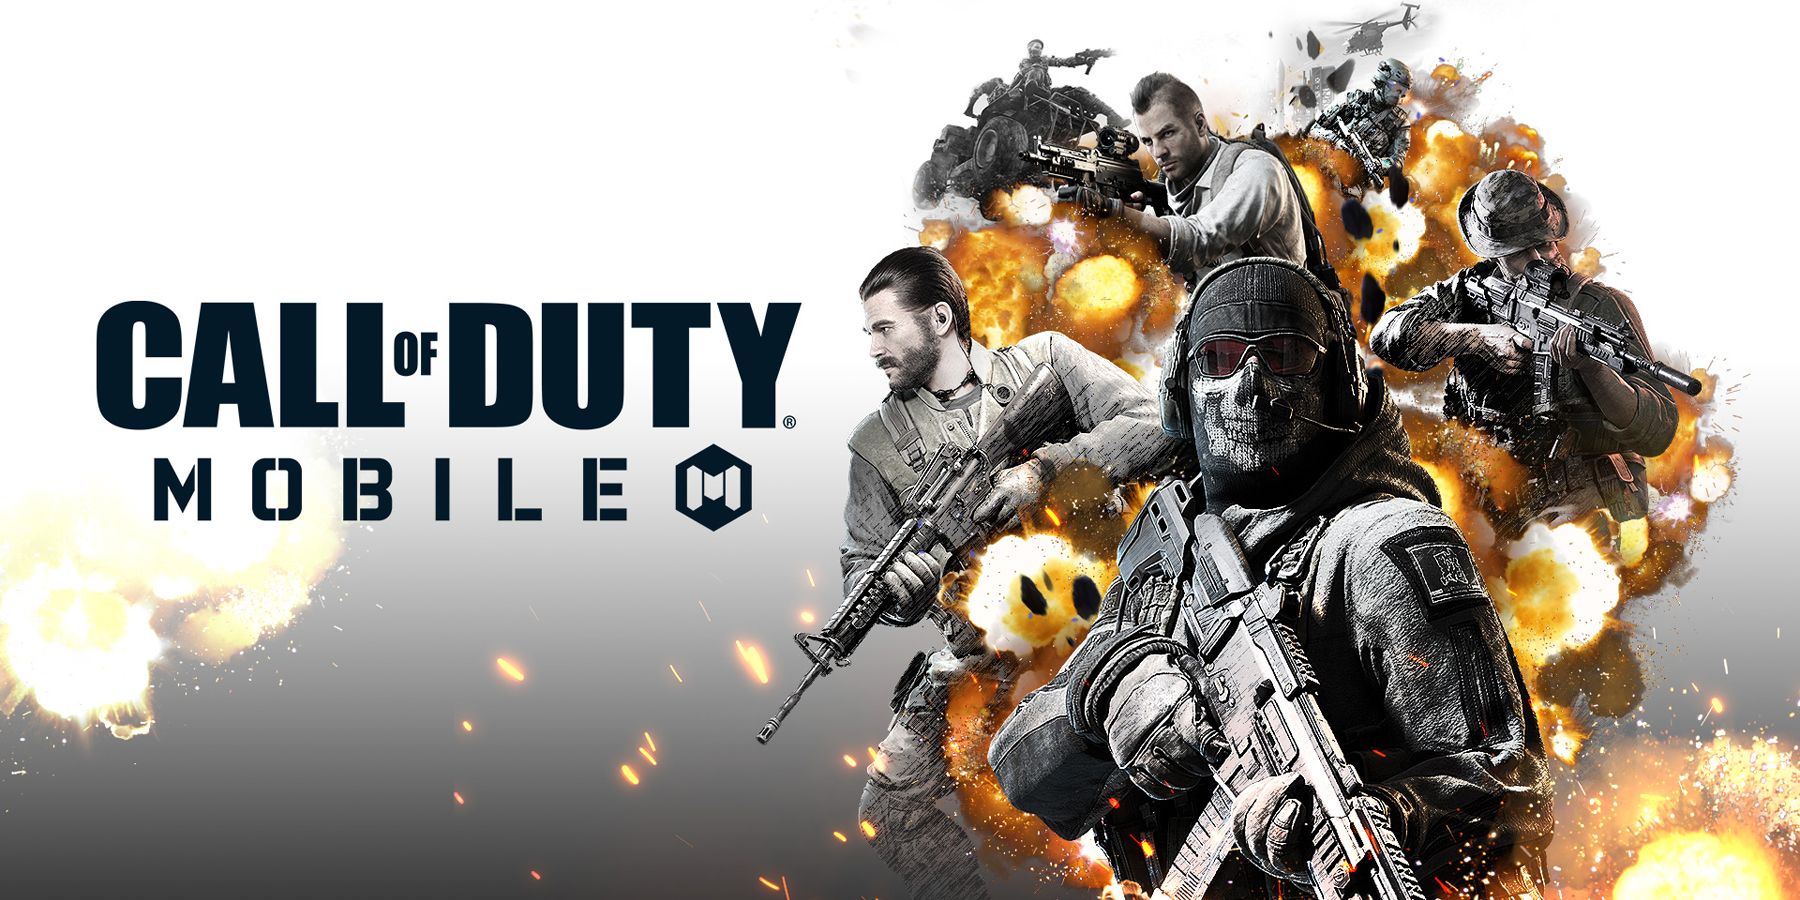 Rumor: Call of Duty Mobile Could Be Getting ‘Phased Out’